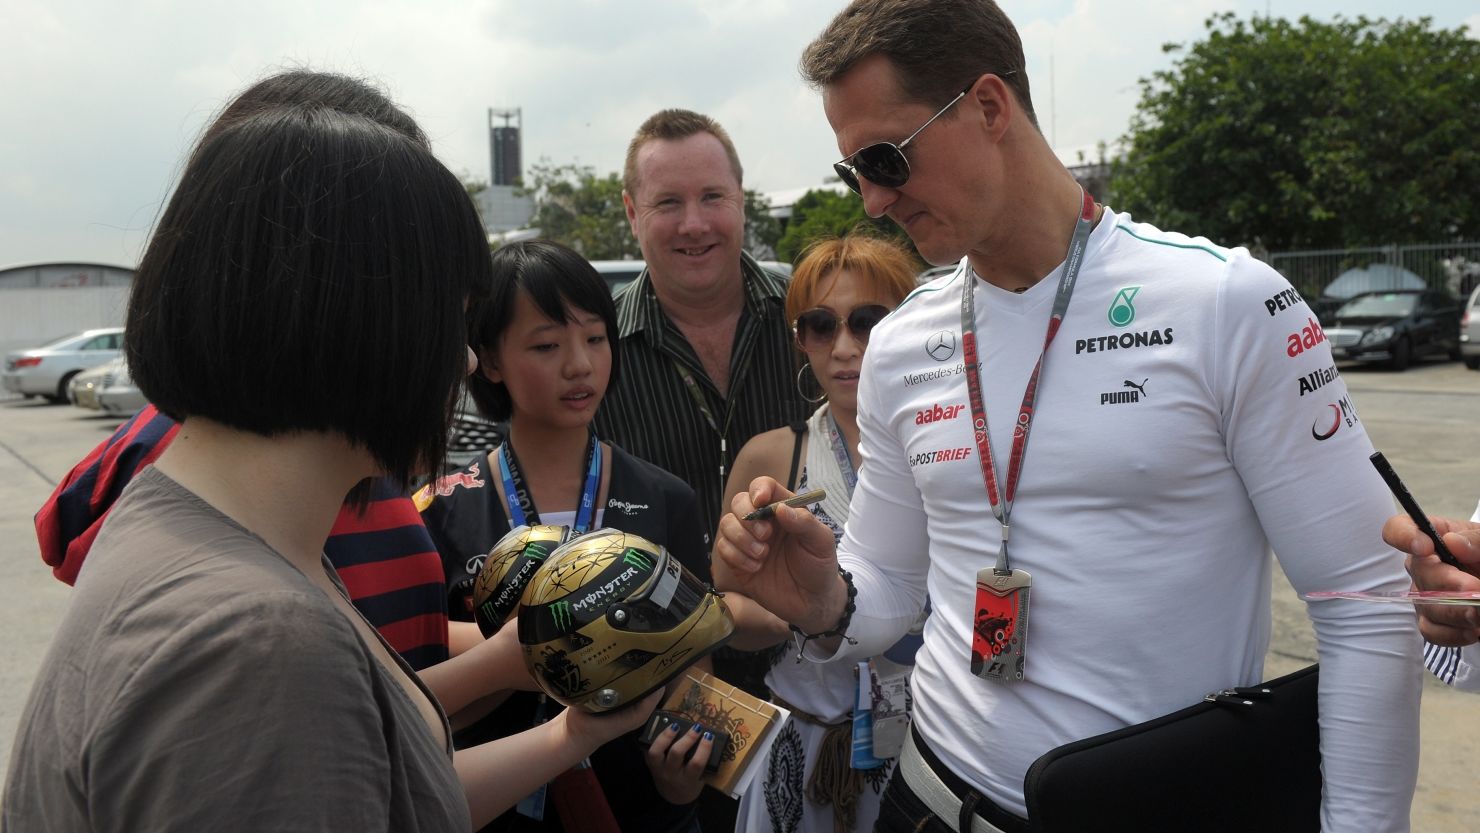 Michael Schumacher won in Shanghai in 2006 with Ferrari but has had little other success at the race.